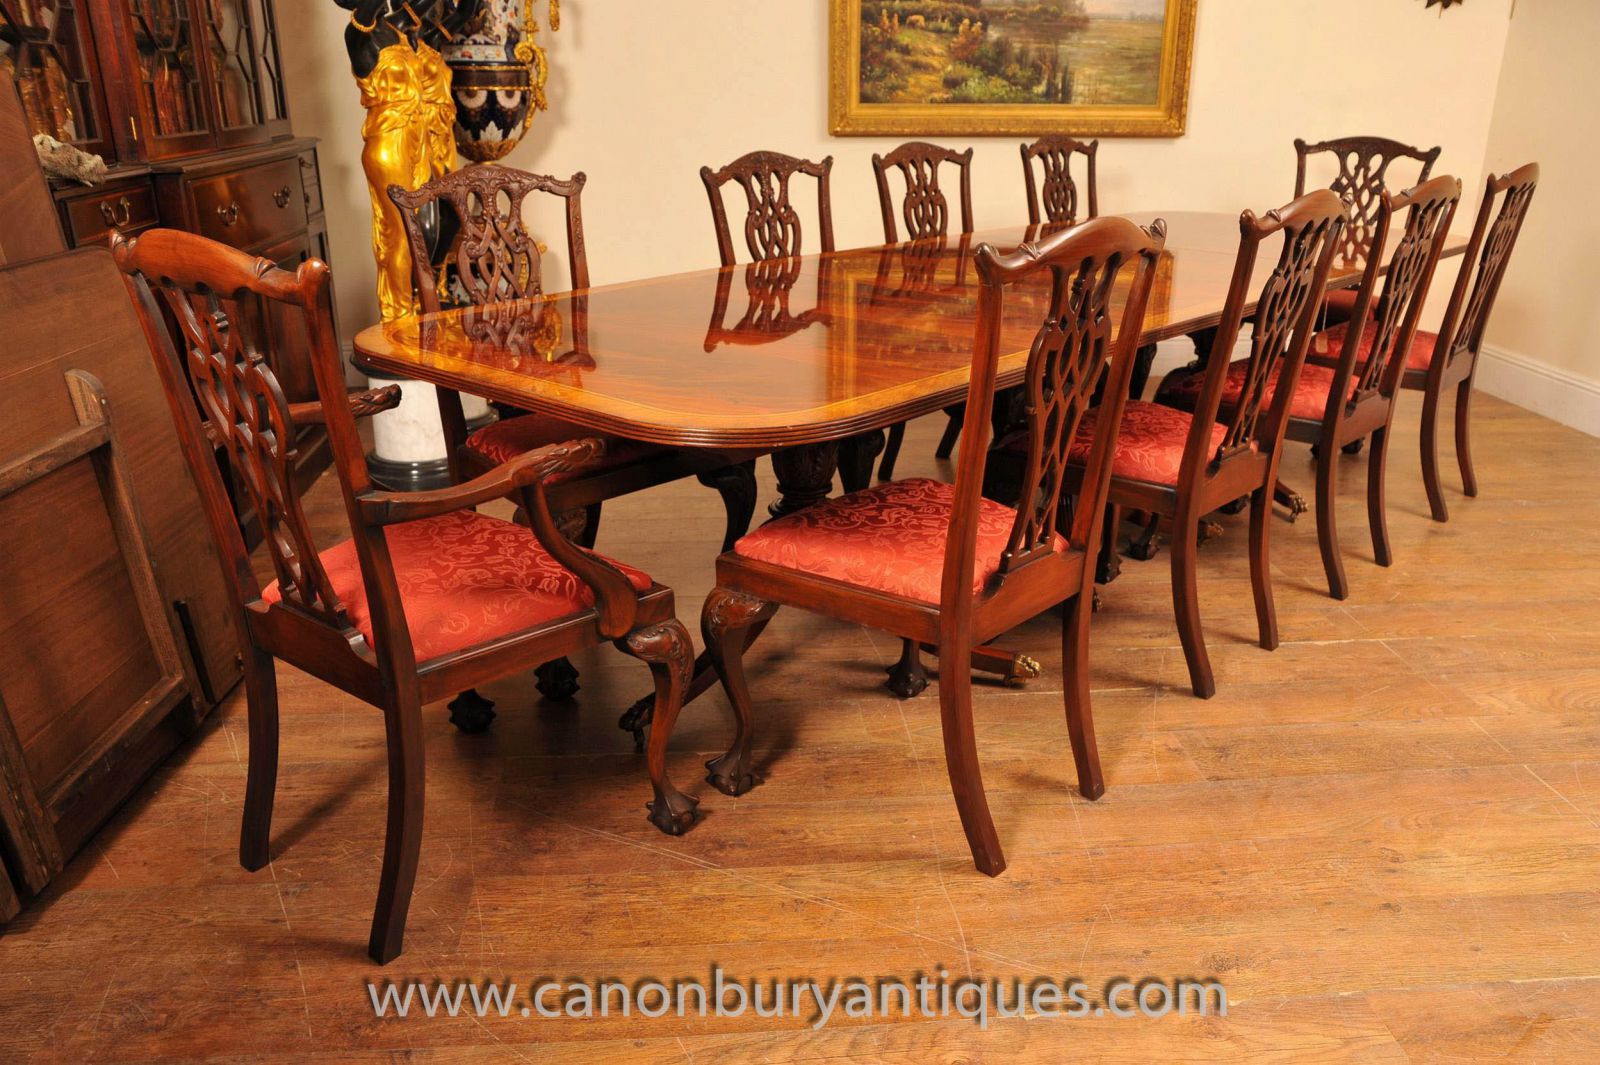 Chippendale chairs around the Regency dining table